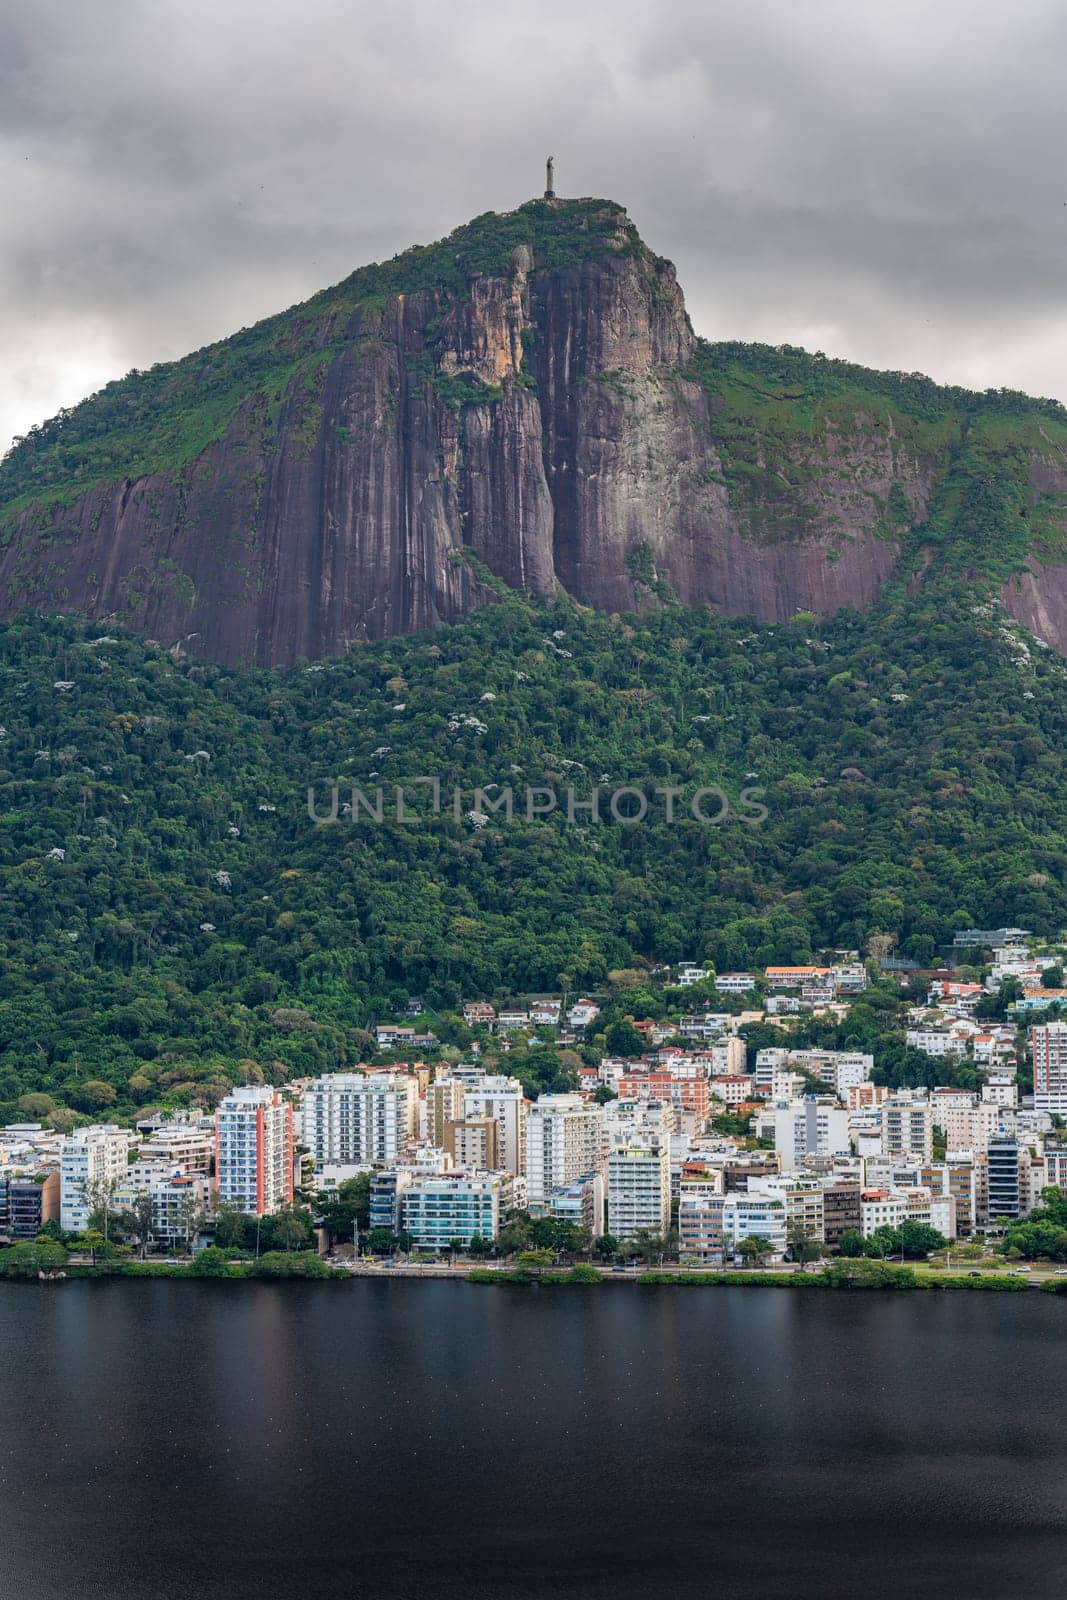 Iconic Rio de Janeiro scene with Christ the Redeemer overlooking Lagoa from a peak.